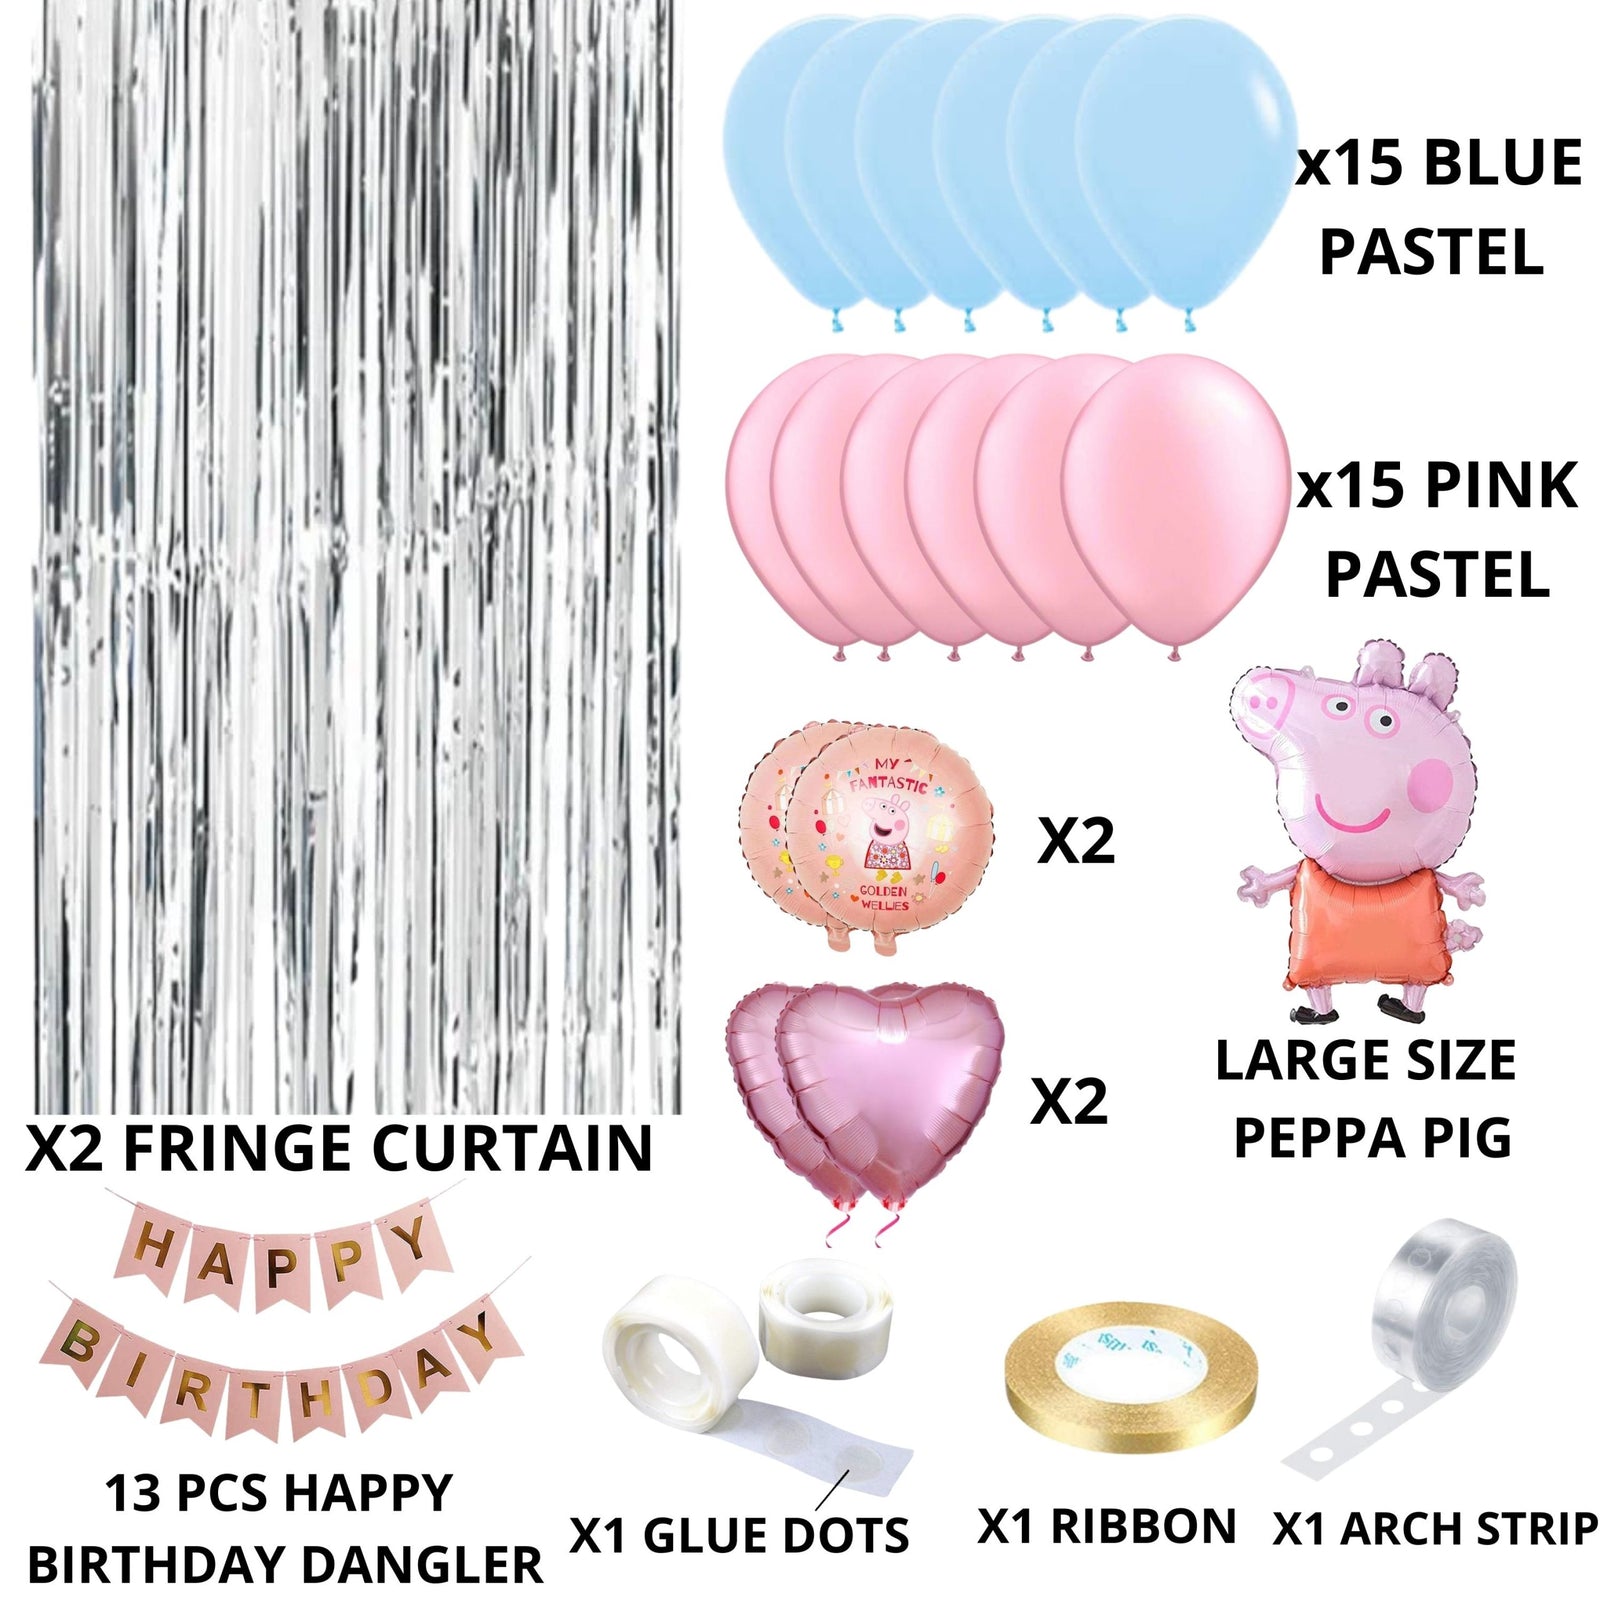 40Pcs Peppa Pig Theme Birthday Decoration  for Baby Kids Girls Boys, Peppa Pig Foil Balloon & Banner, Pastel Pink & Blue Balloons, Silver Curtains